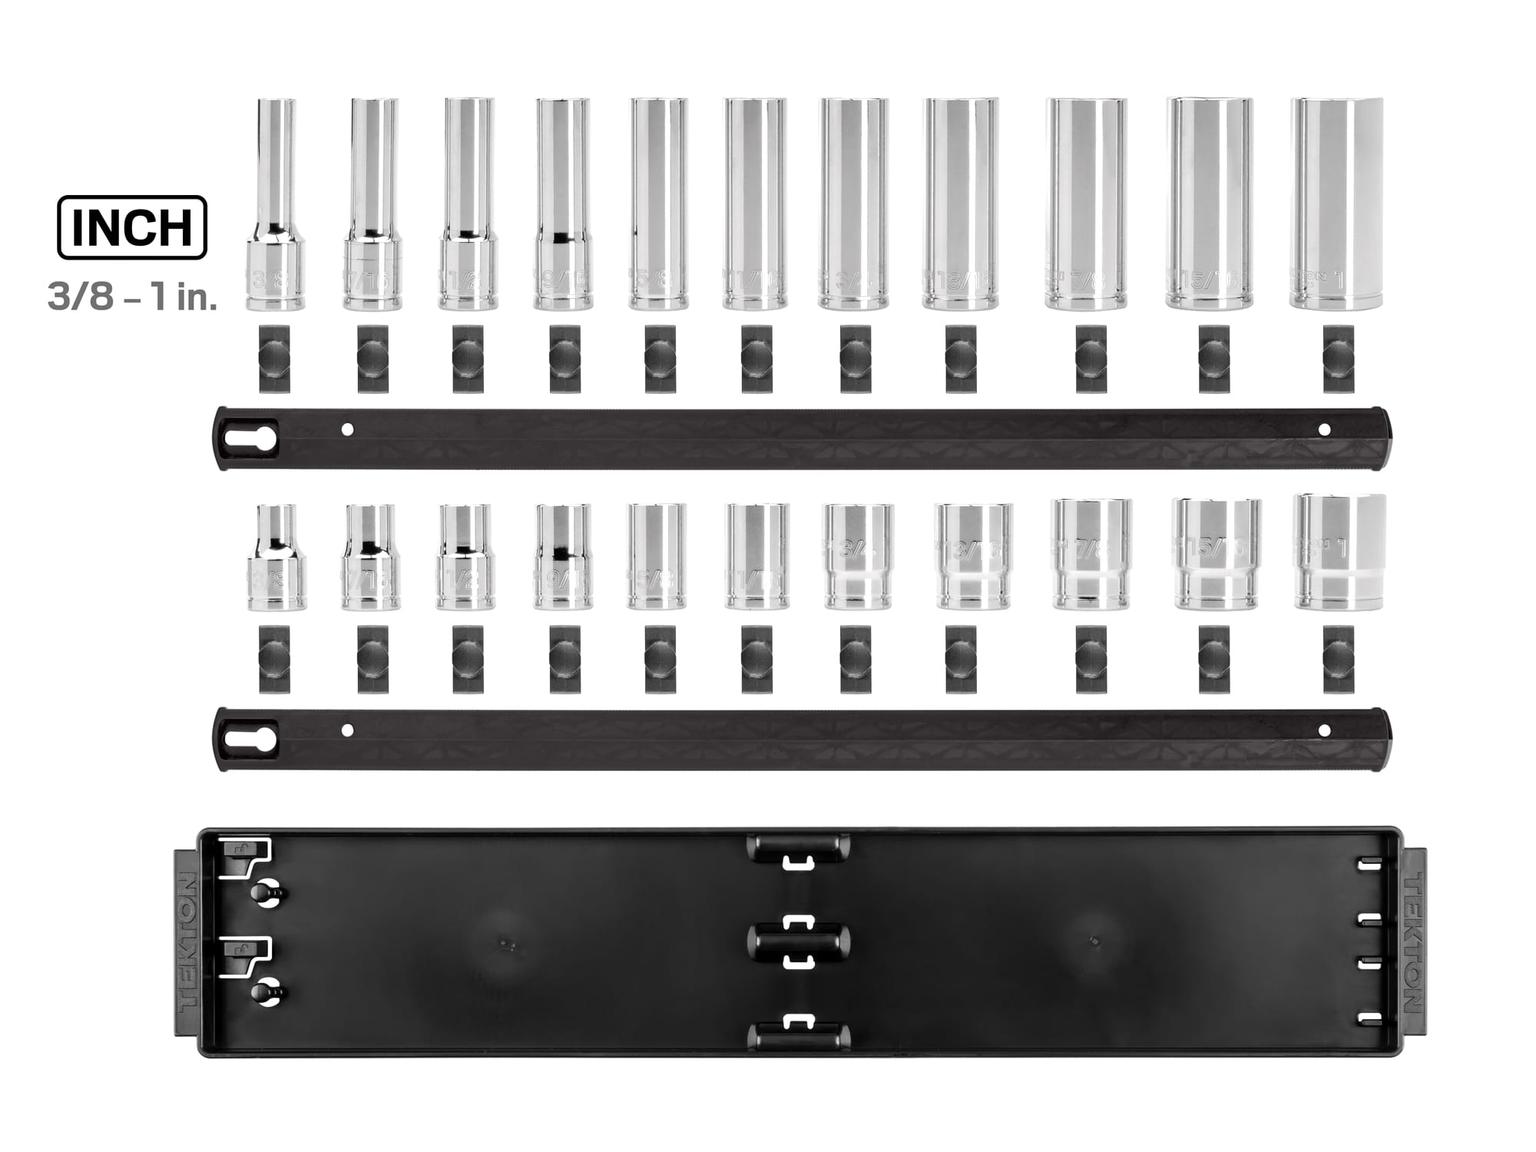 TEKTON SHD92209-T 1/2 Inch Drive 6-Point Socket Set with Rails, 22-Piece (3/8-1 in.)